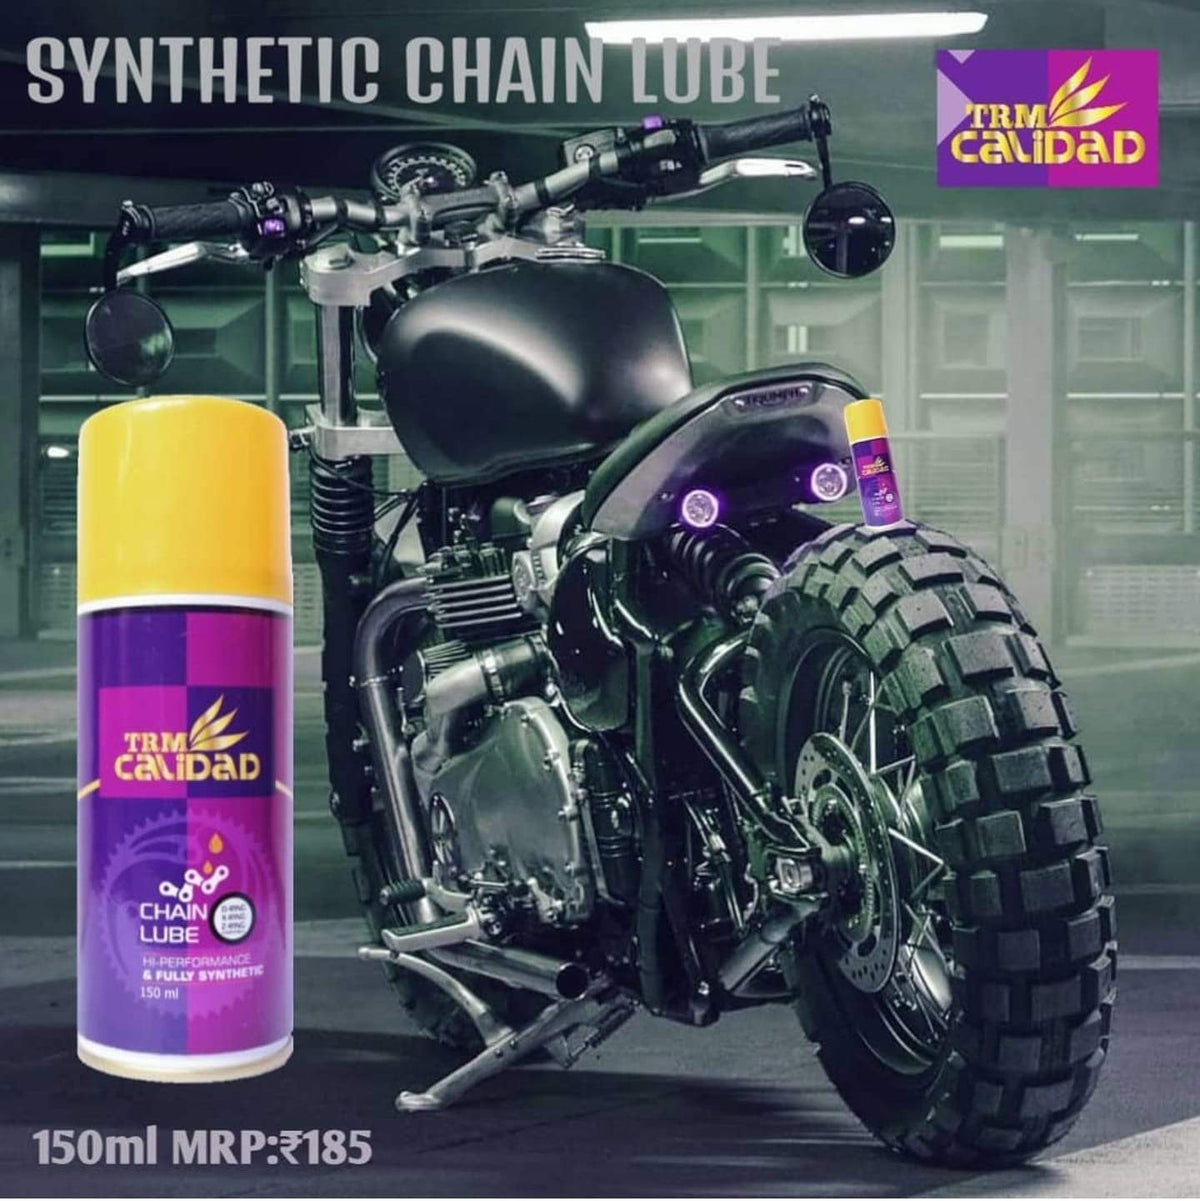 Fully Synthetic Chain Lube 150 ml ( TRM Calidad ) - LRL Motors